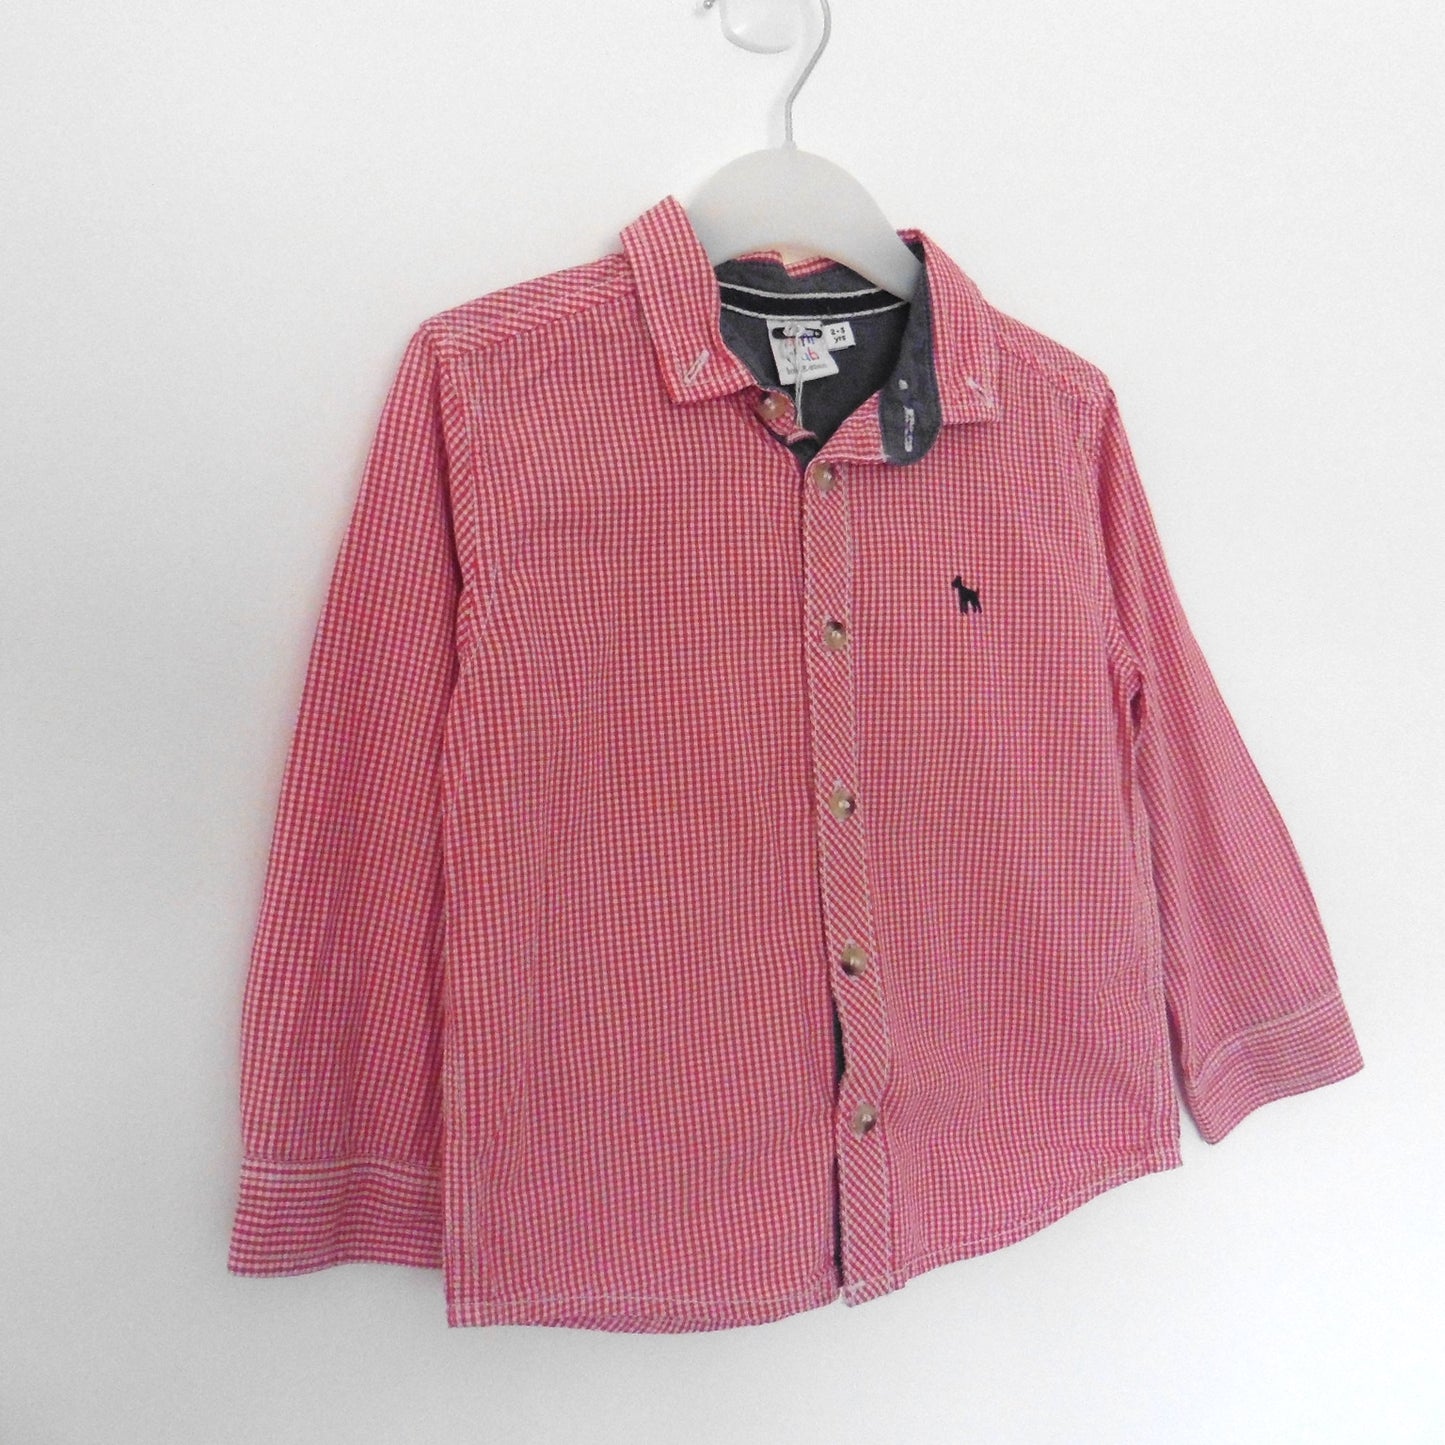 Miniclub Red Cheque Shirt 2-3y